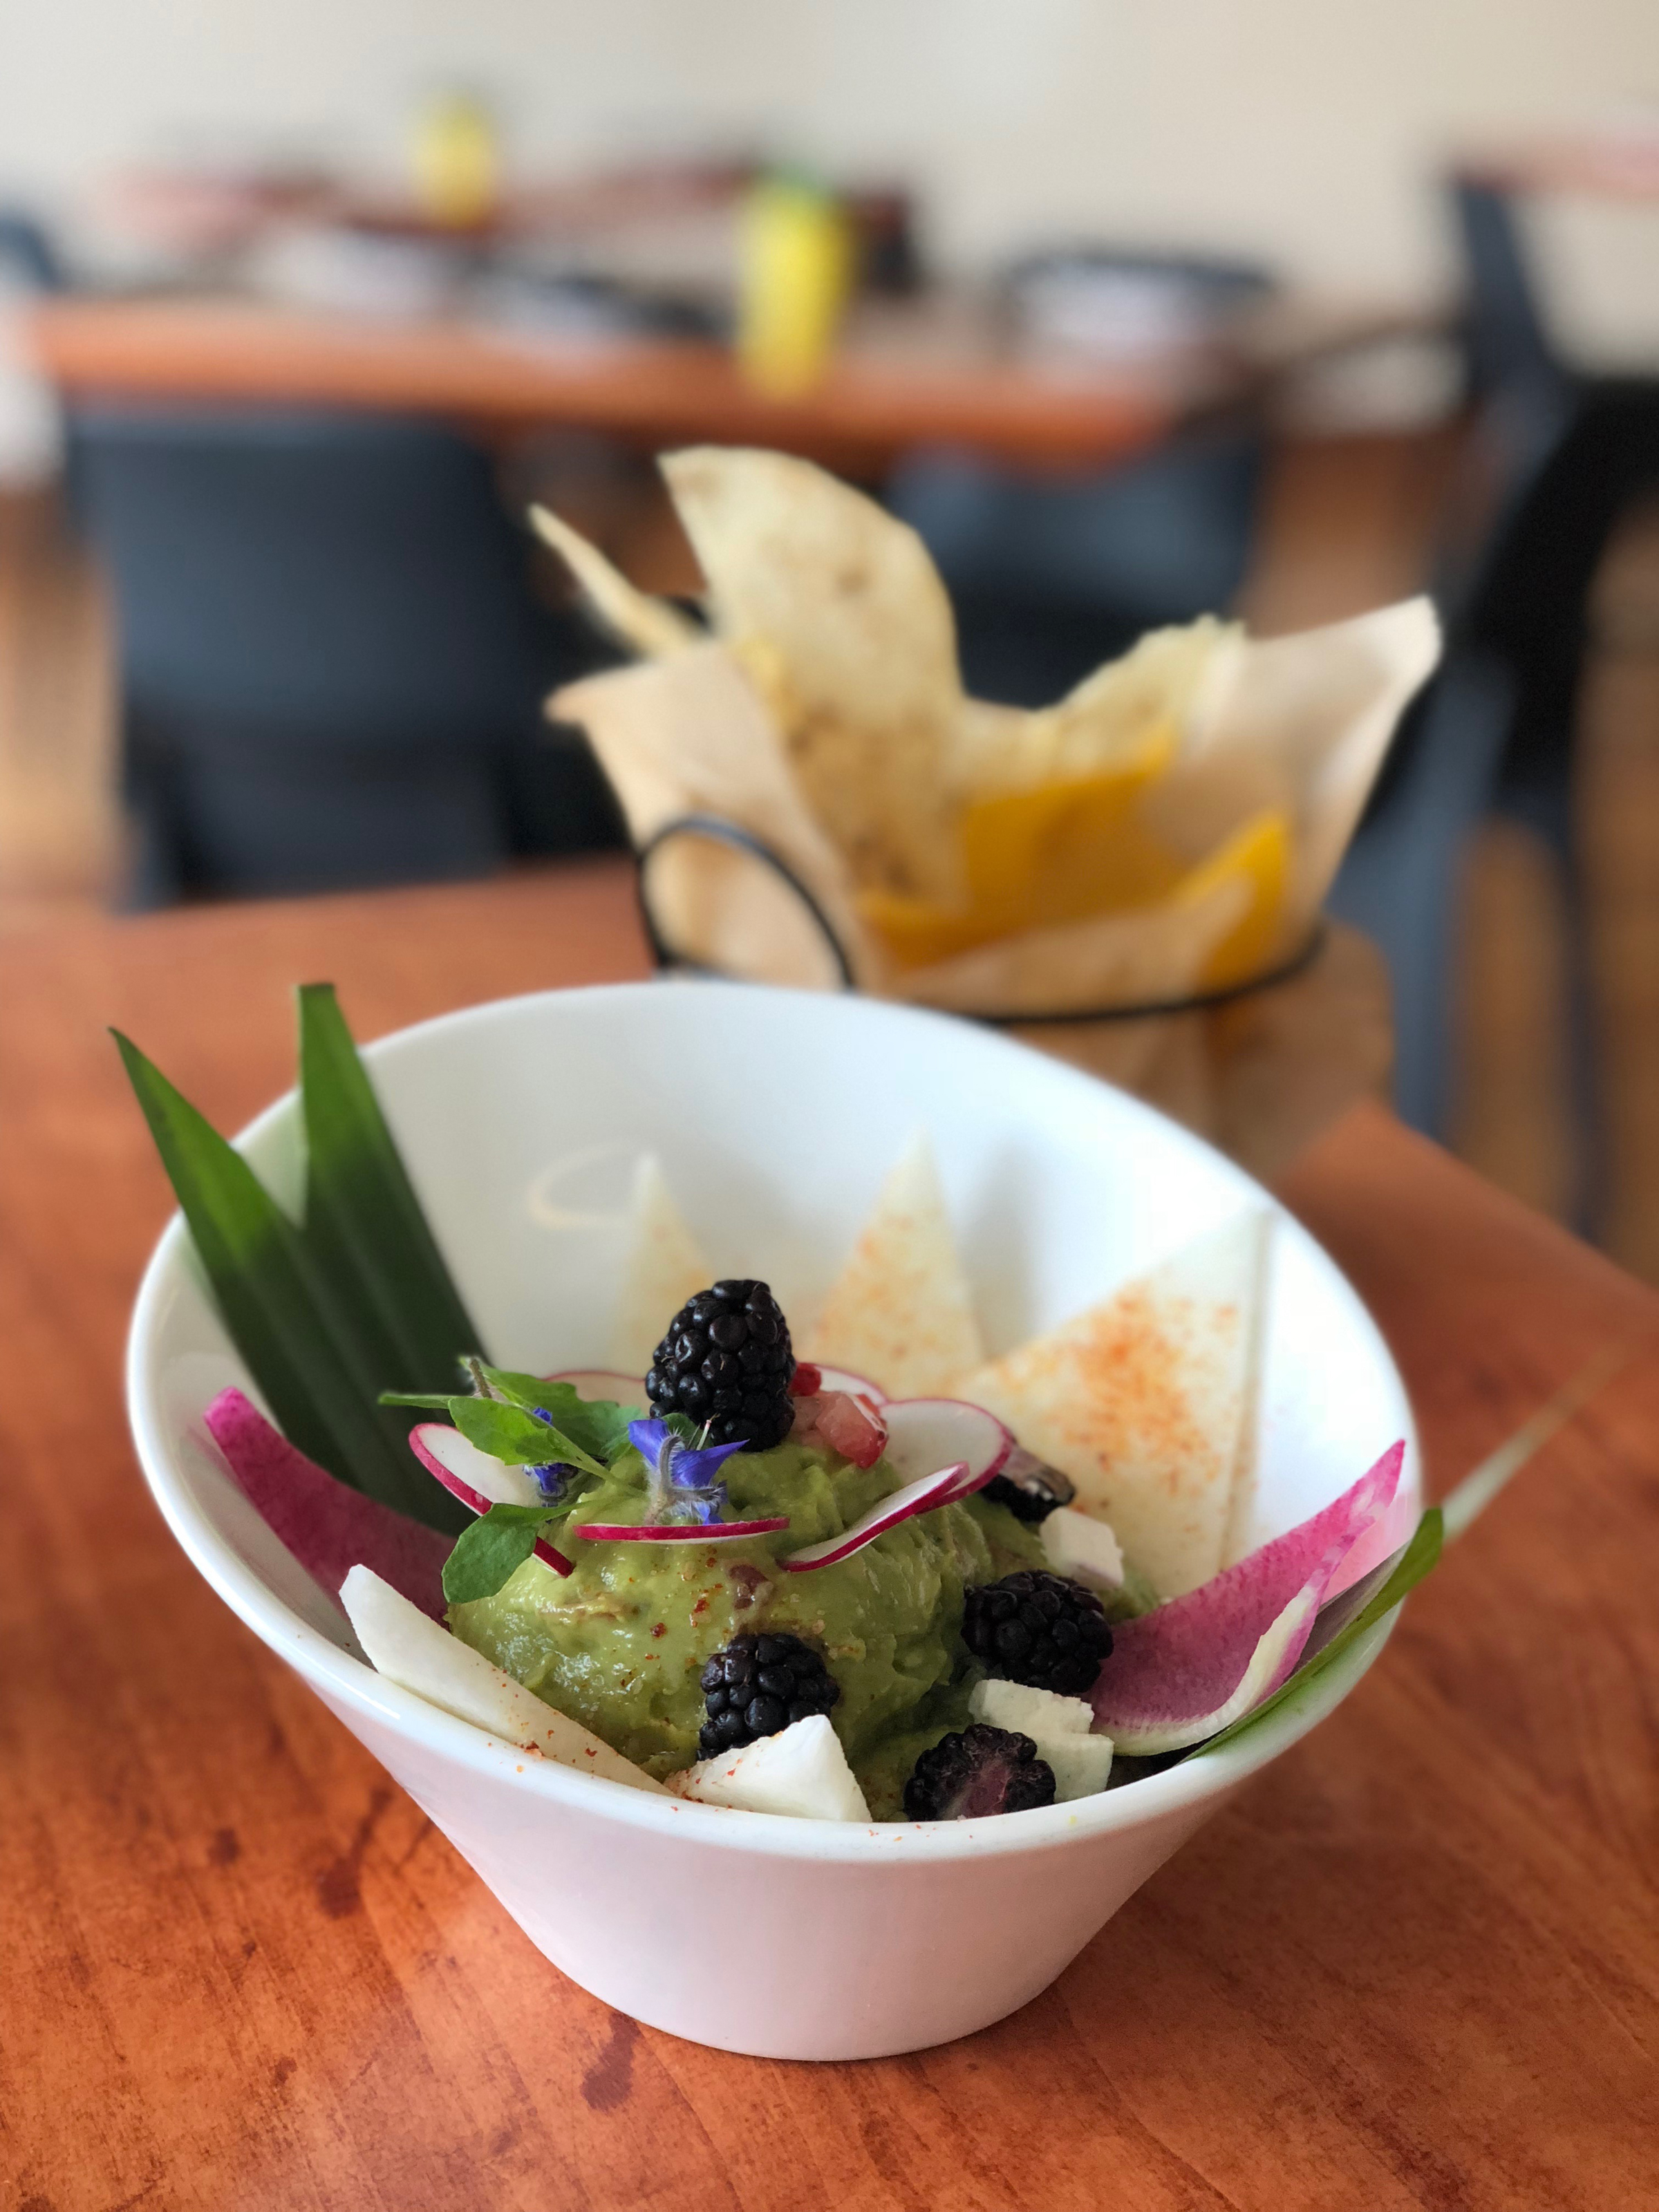 Mexo Highlights Mesoamerican Cuisine With Bold Flavors And Bright Colors photo